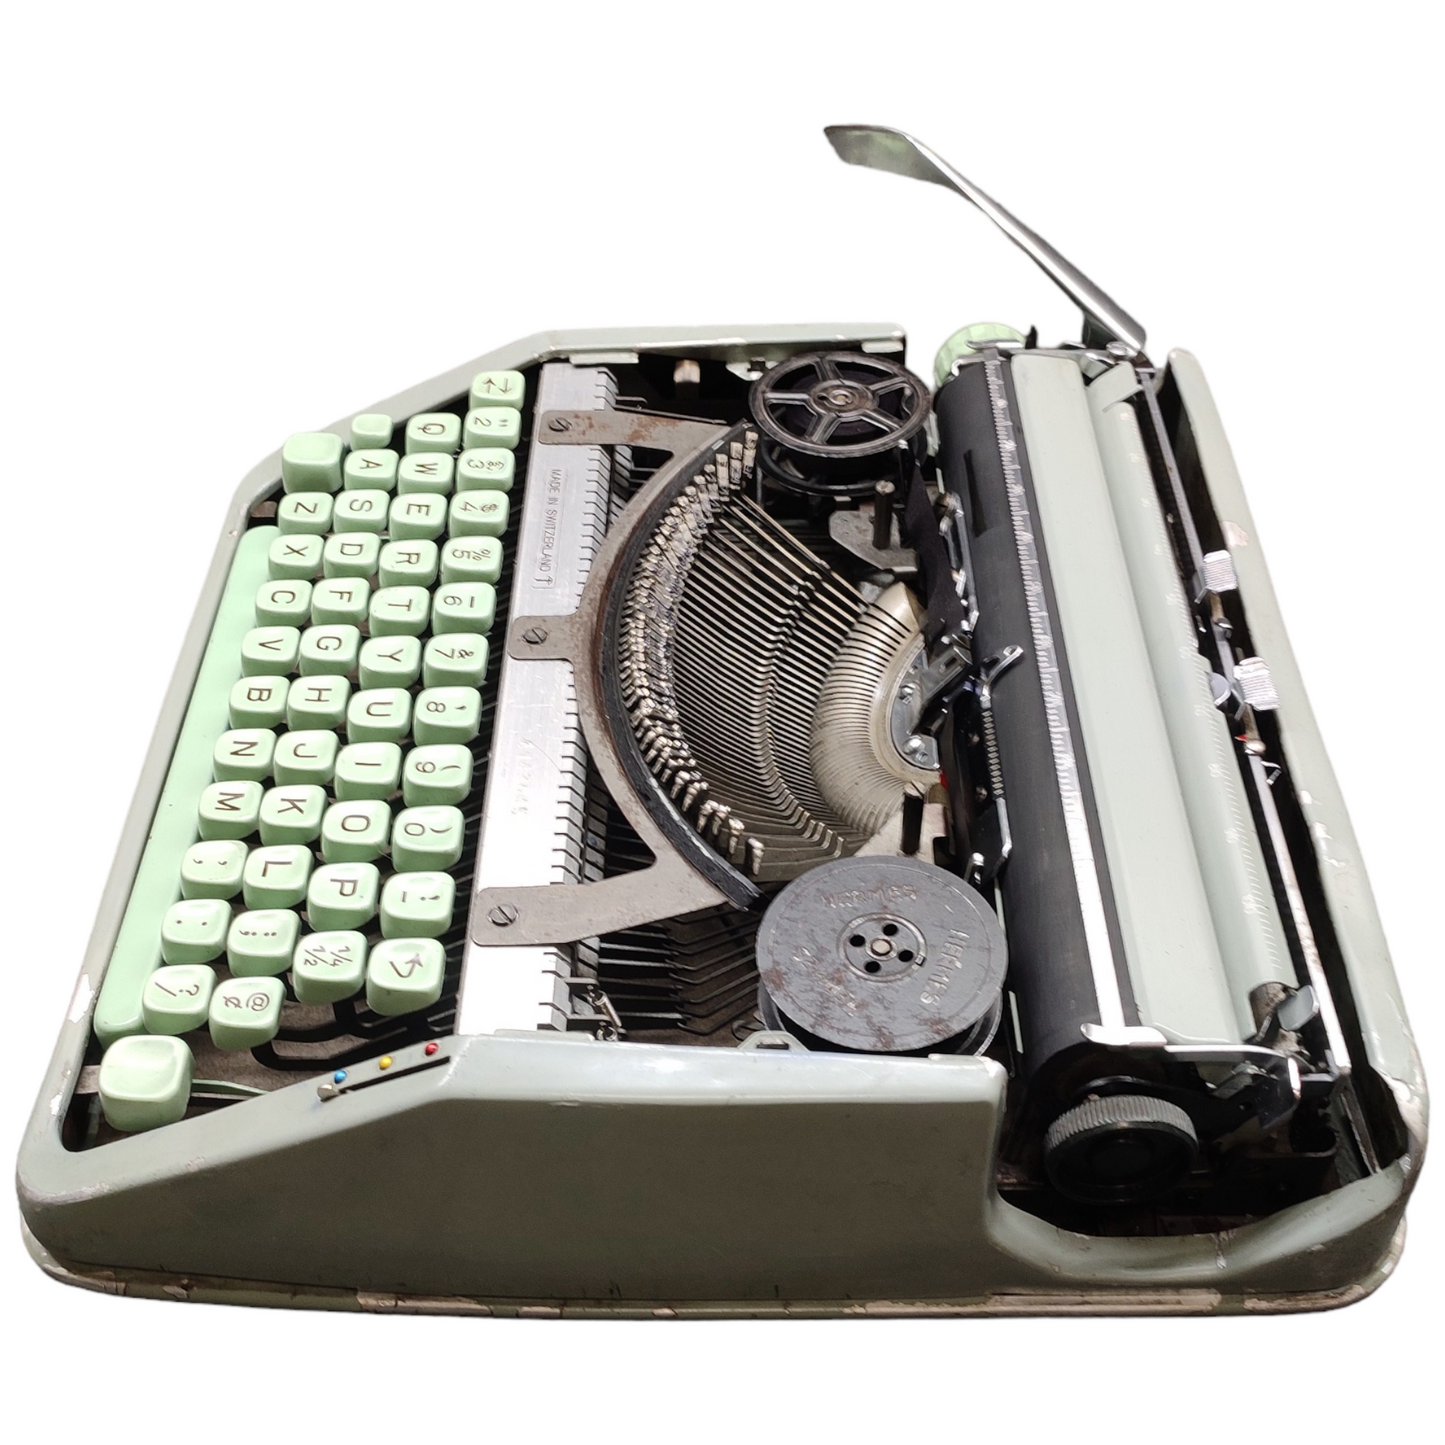 Hermes Baby Rocket Typewriter. Available from universaltypewritercompany.in